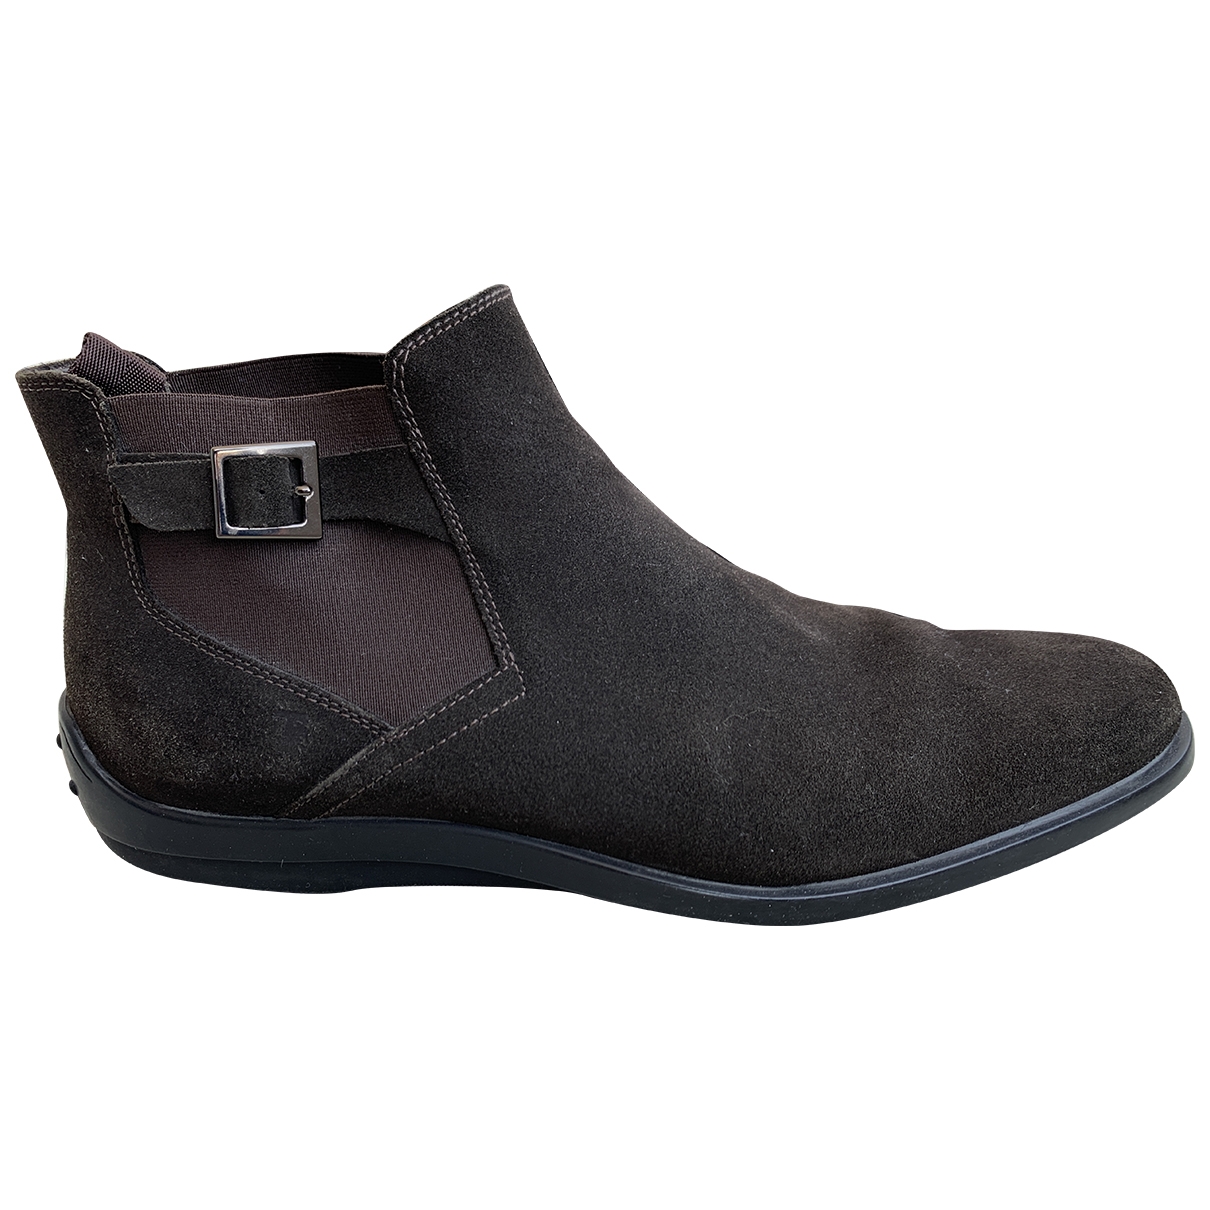 Super intense SALE Max 48% OFF Brown Suede Boots